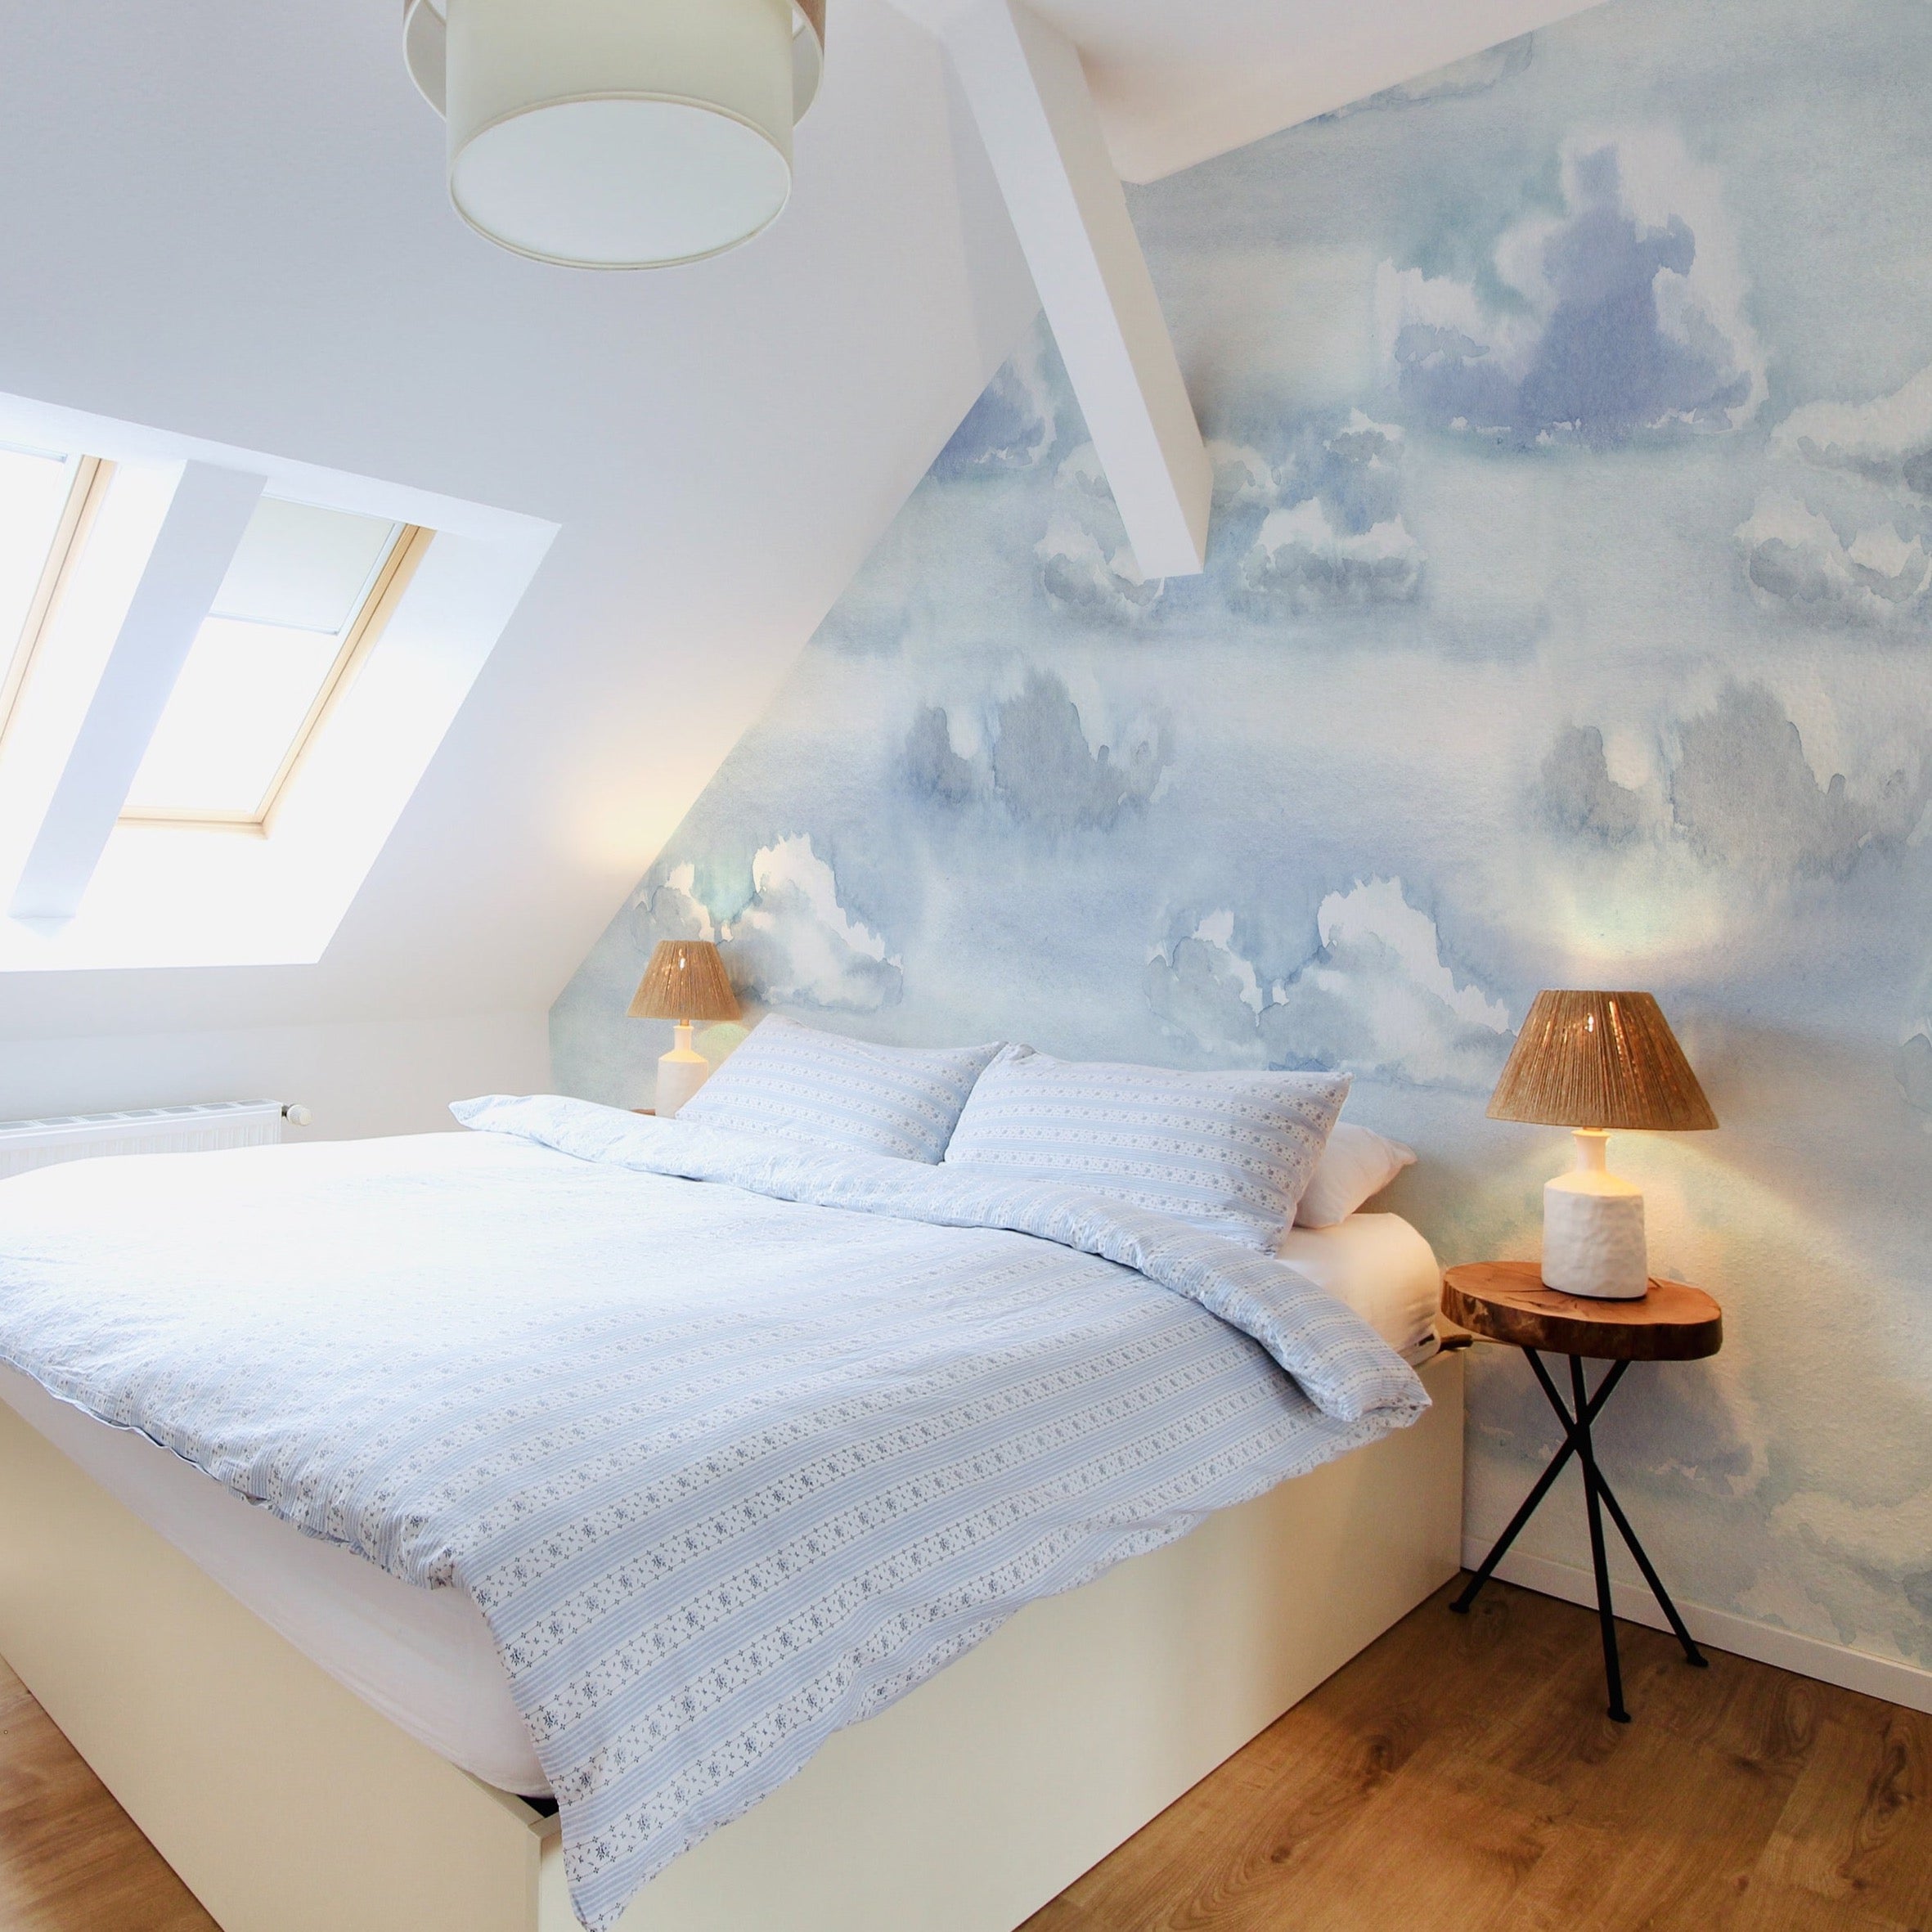 The Watercolour Cloud and Skies II wallpaper adorning a bedroom wall behind a neatly made bed, evoking a calm and dreamy atmosphere in the space.